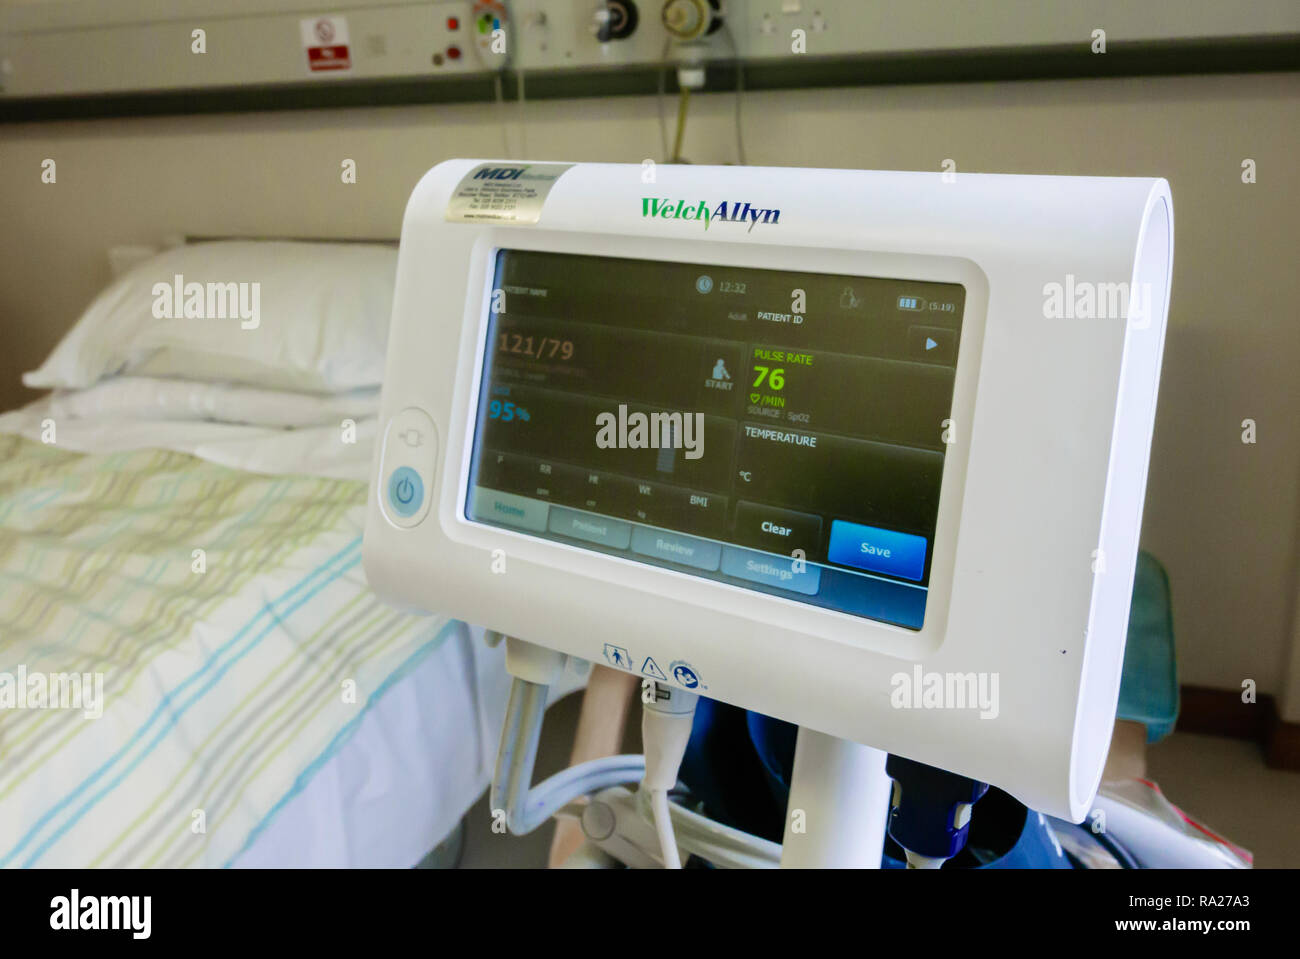 WelchAllyn blood pressure monitor in a hospital ward showing a normal blood  pressure of 121/79, and a blood saturation level of 95 Stock Photo - Alamy